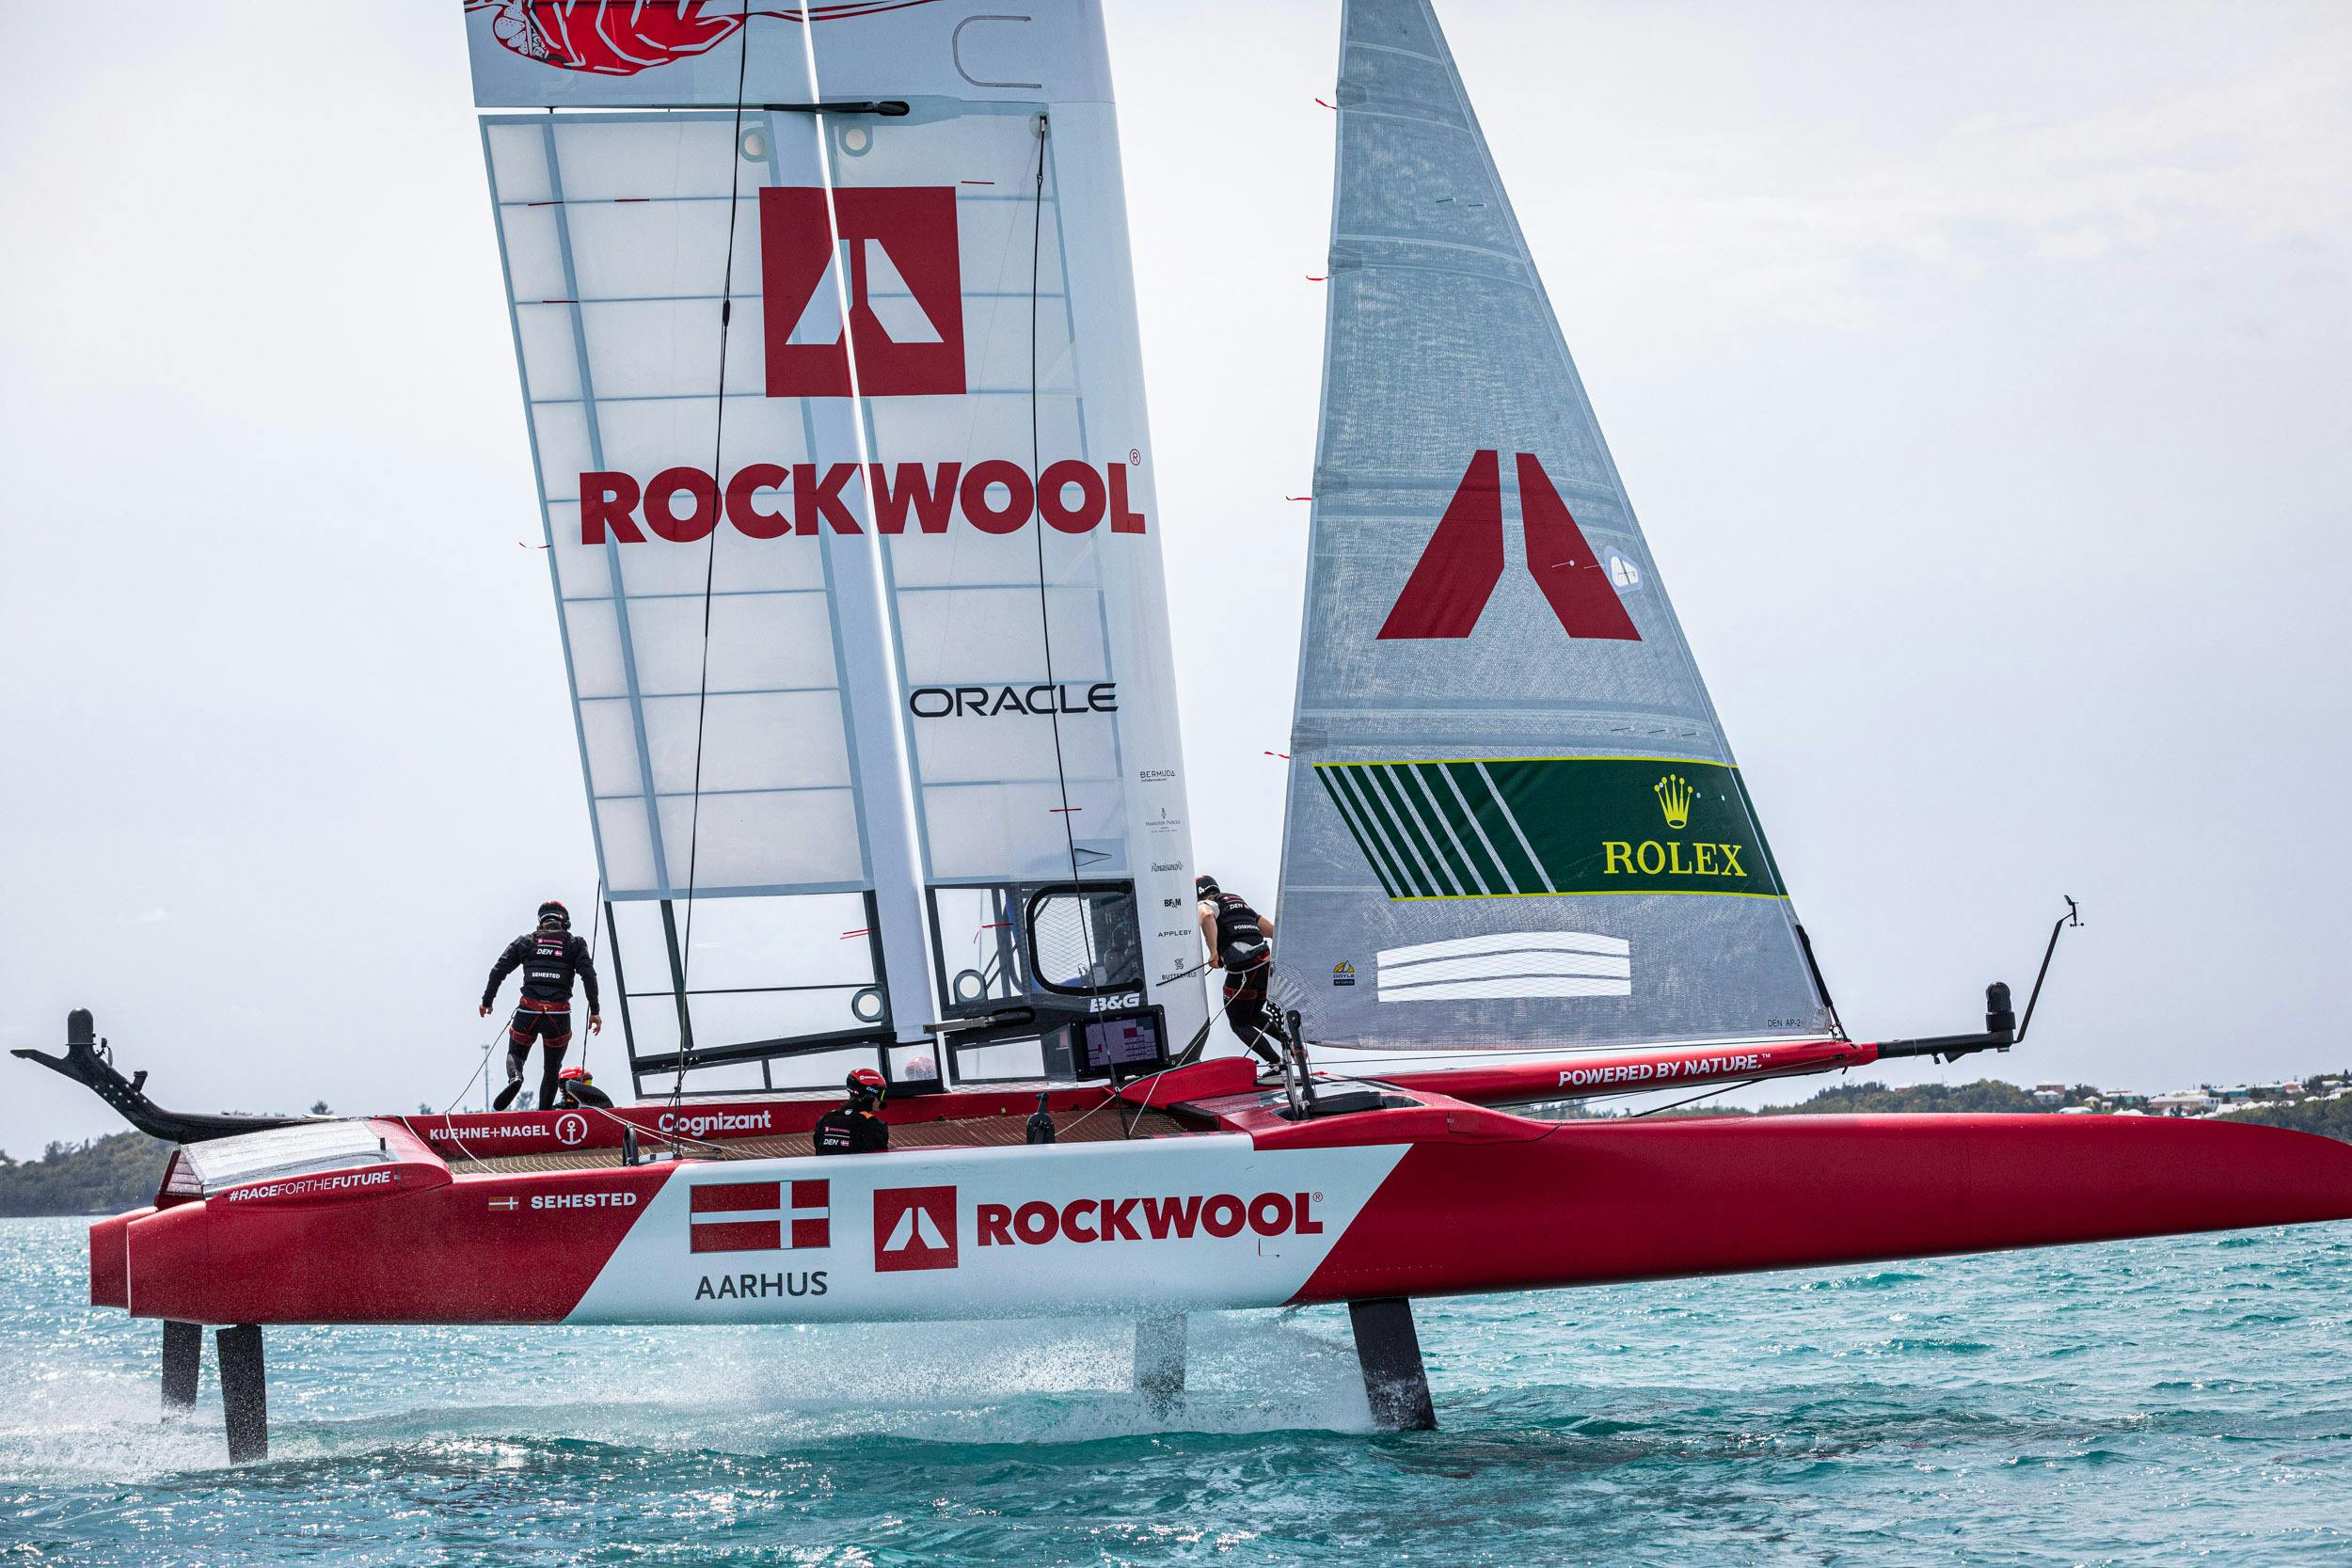 How the world's fastest sail racing boats fly above the water